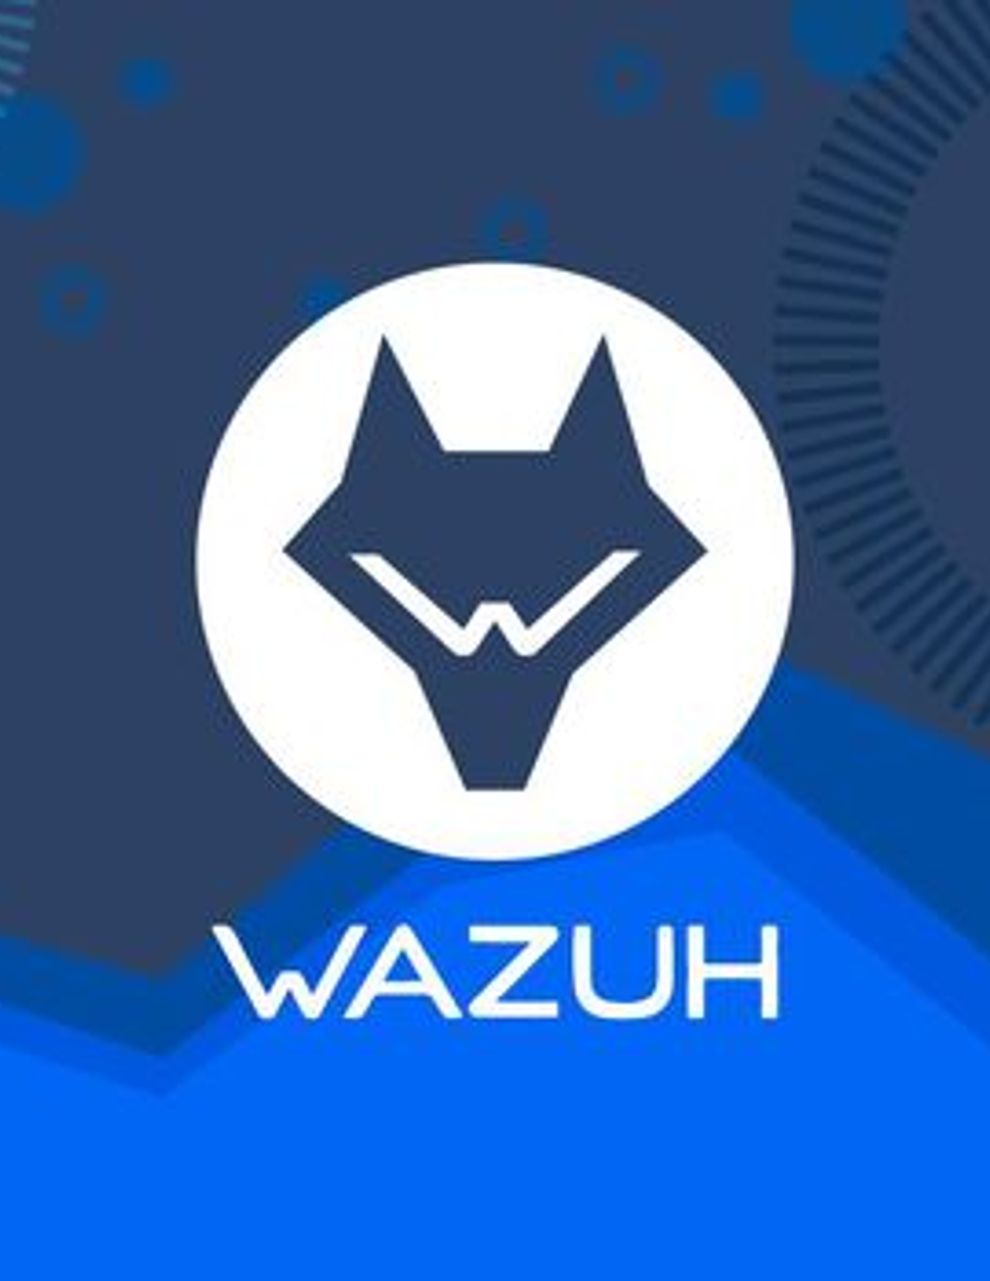 About Wazuh